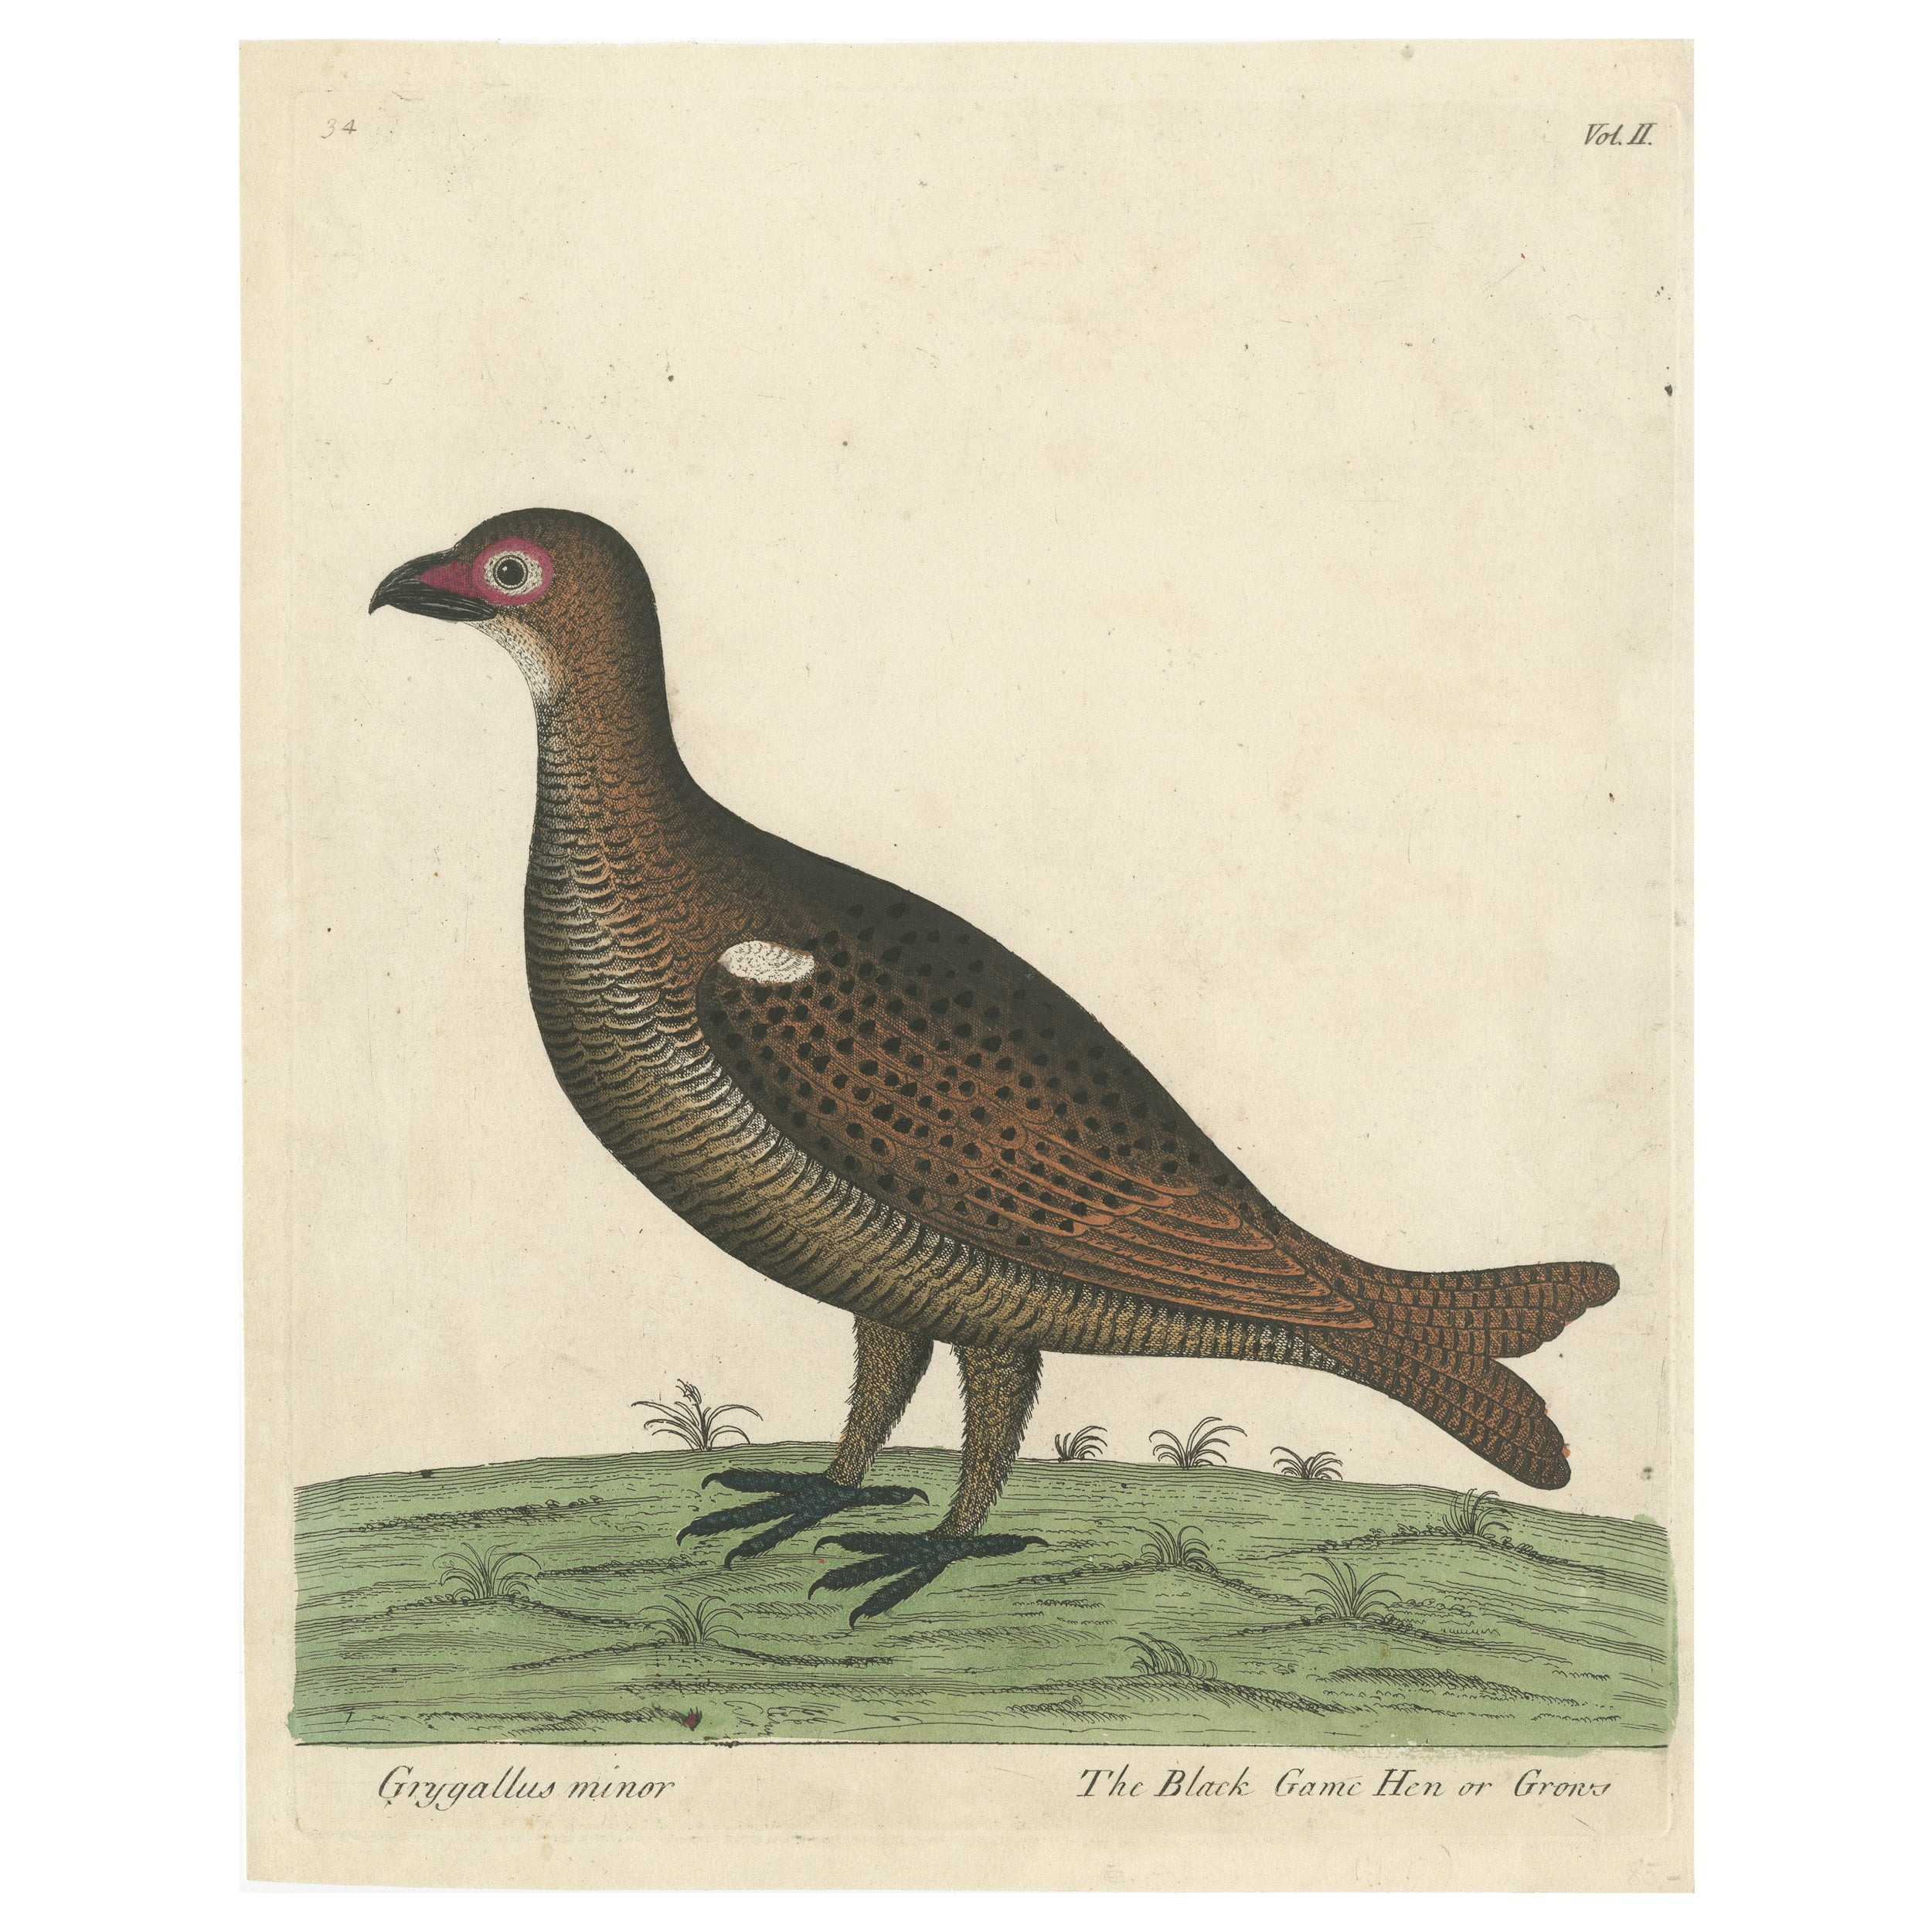 Hand Colored Antique Print of a Black Game Hen or Grouse For Sale